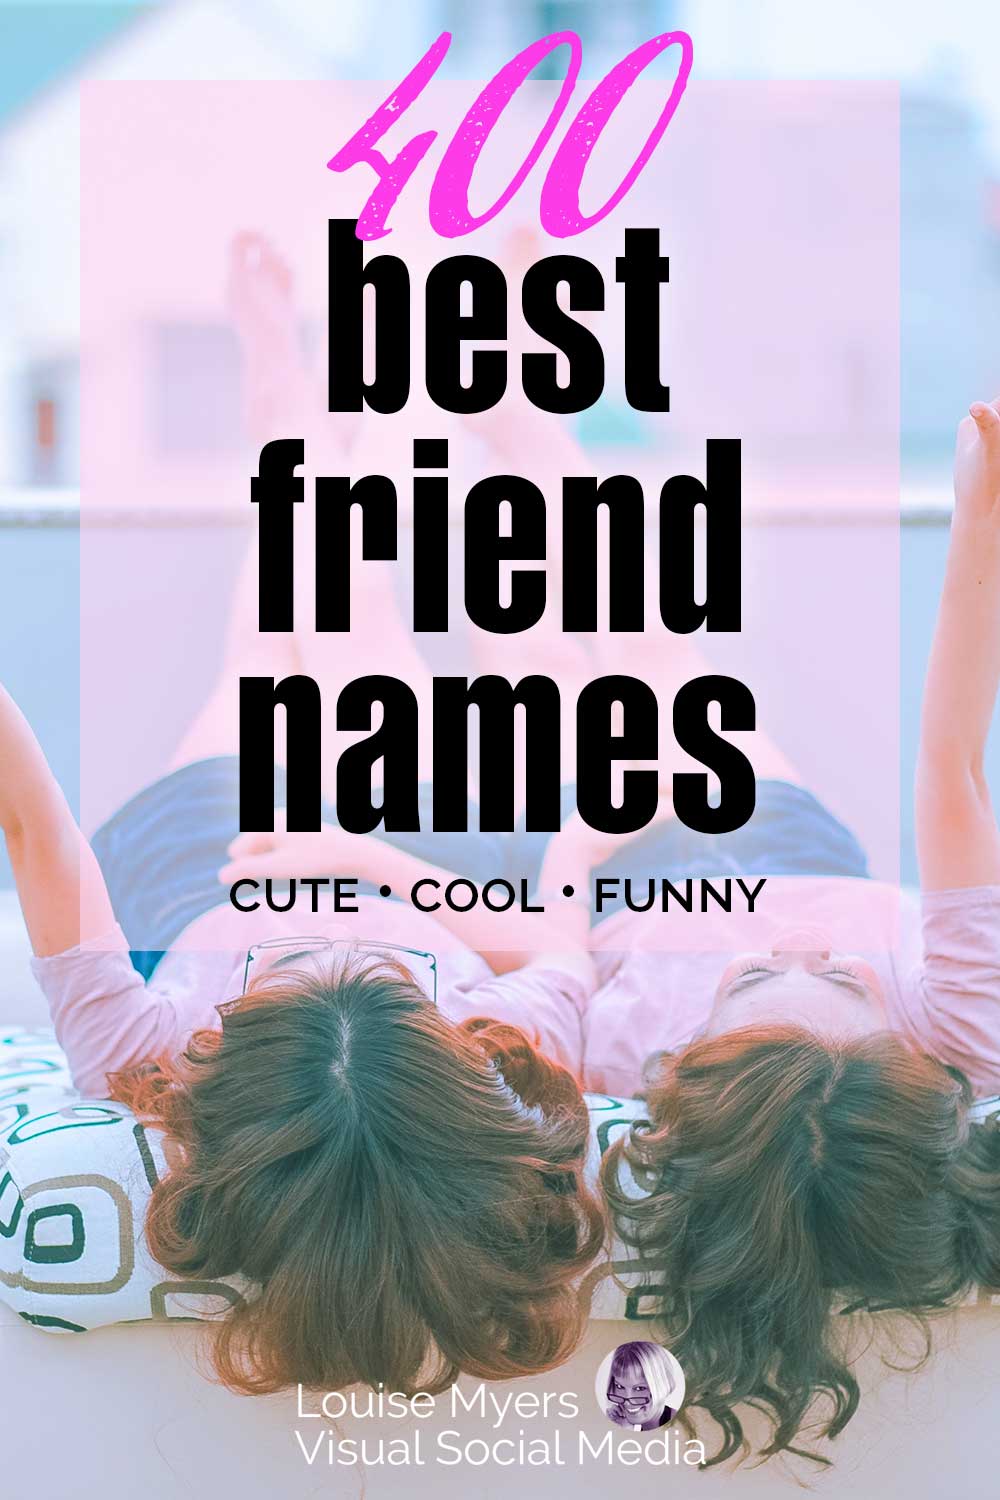 400 Snapchat Names for Your Best Friends: Cute, Funny, Cool! | LouiseM